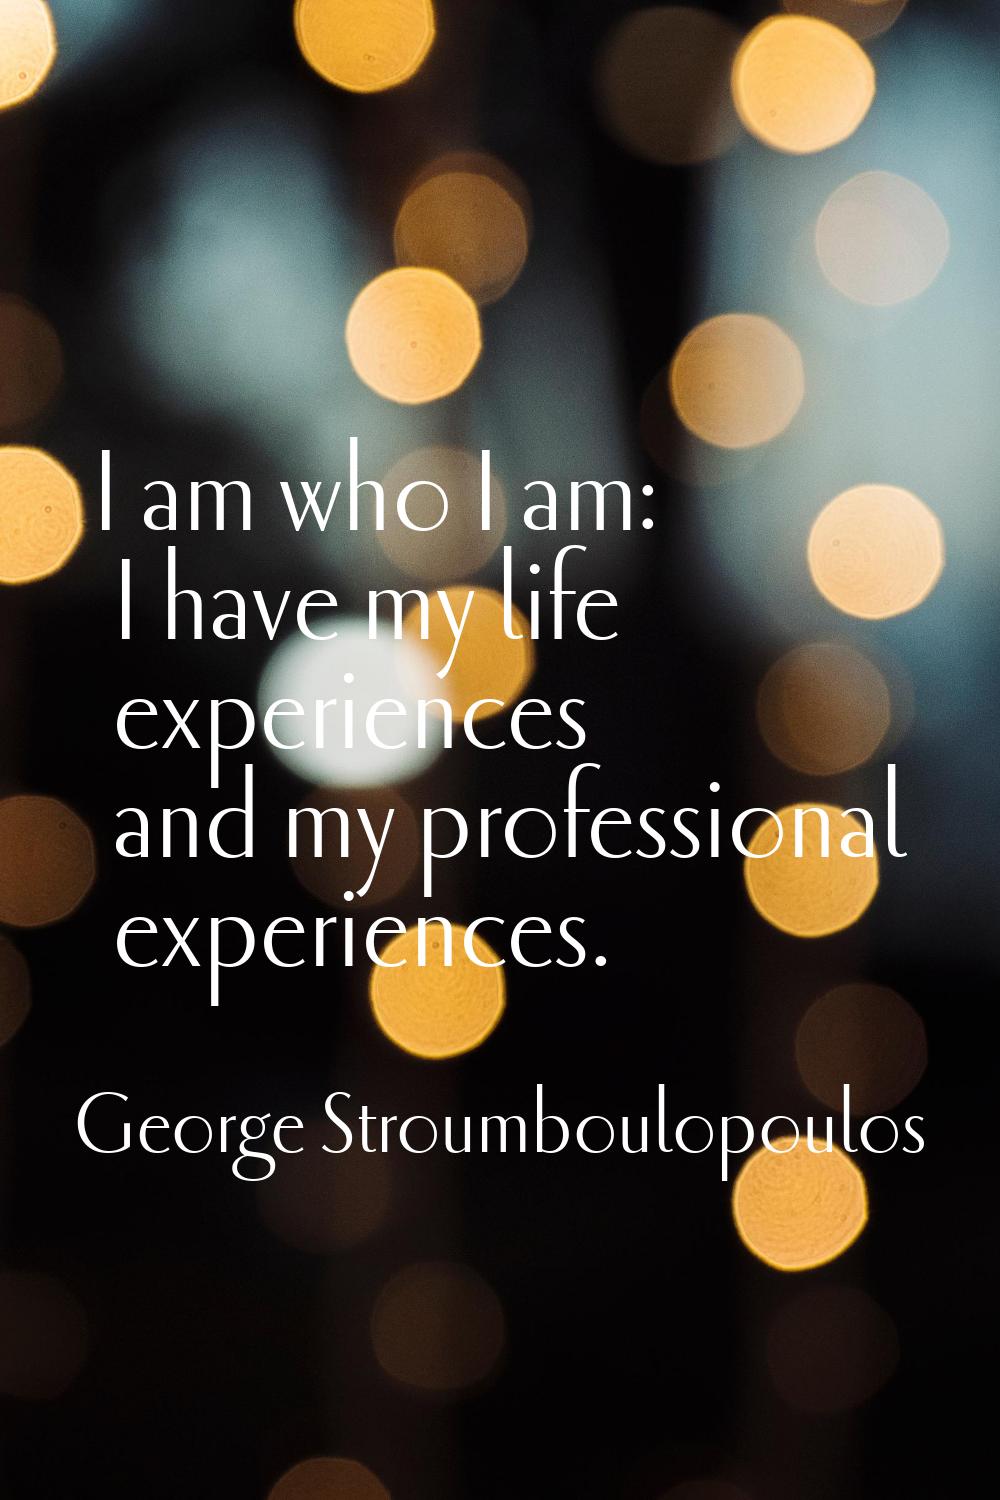 I am who I am: I have my life experiences and my professional experiences.